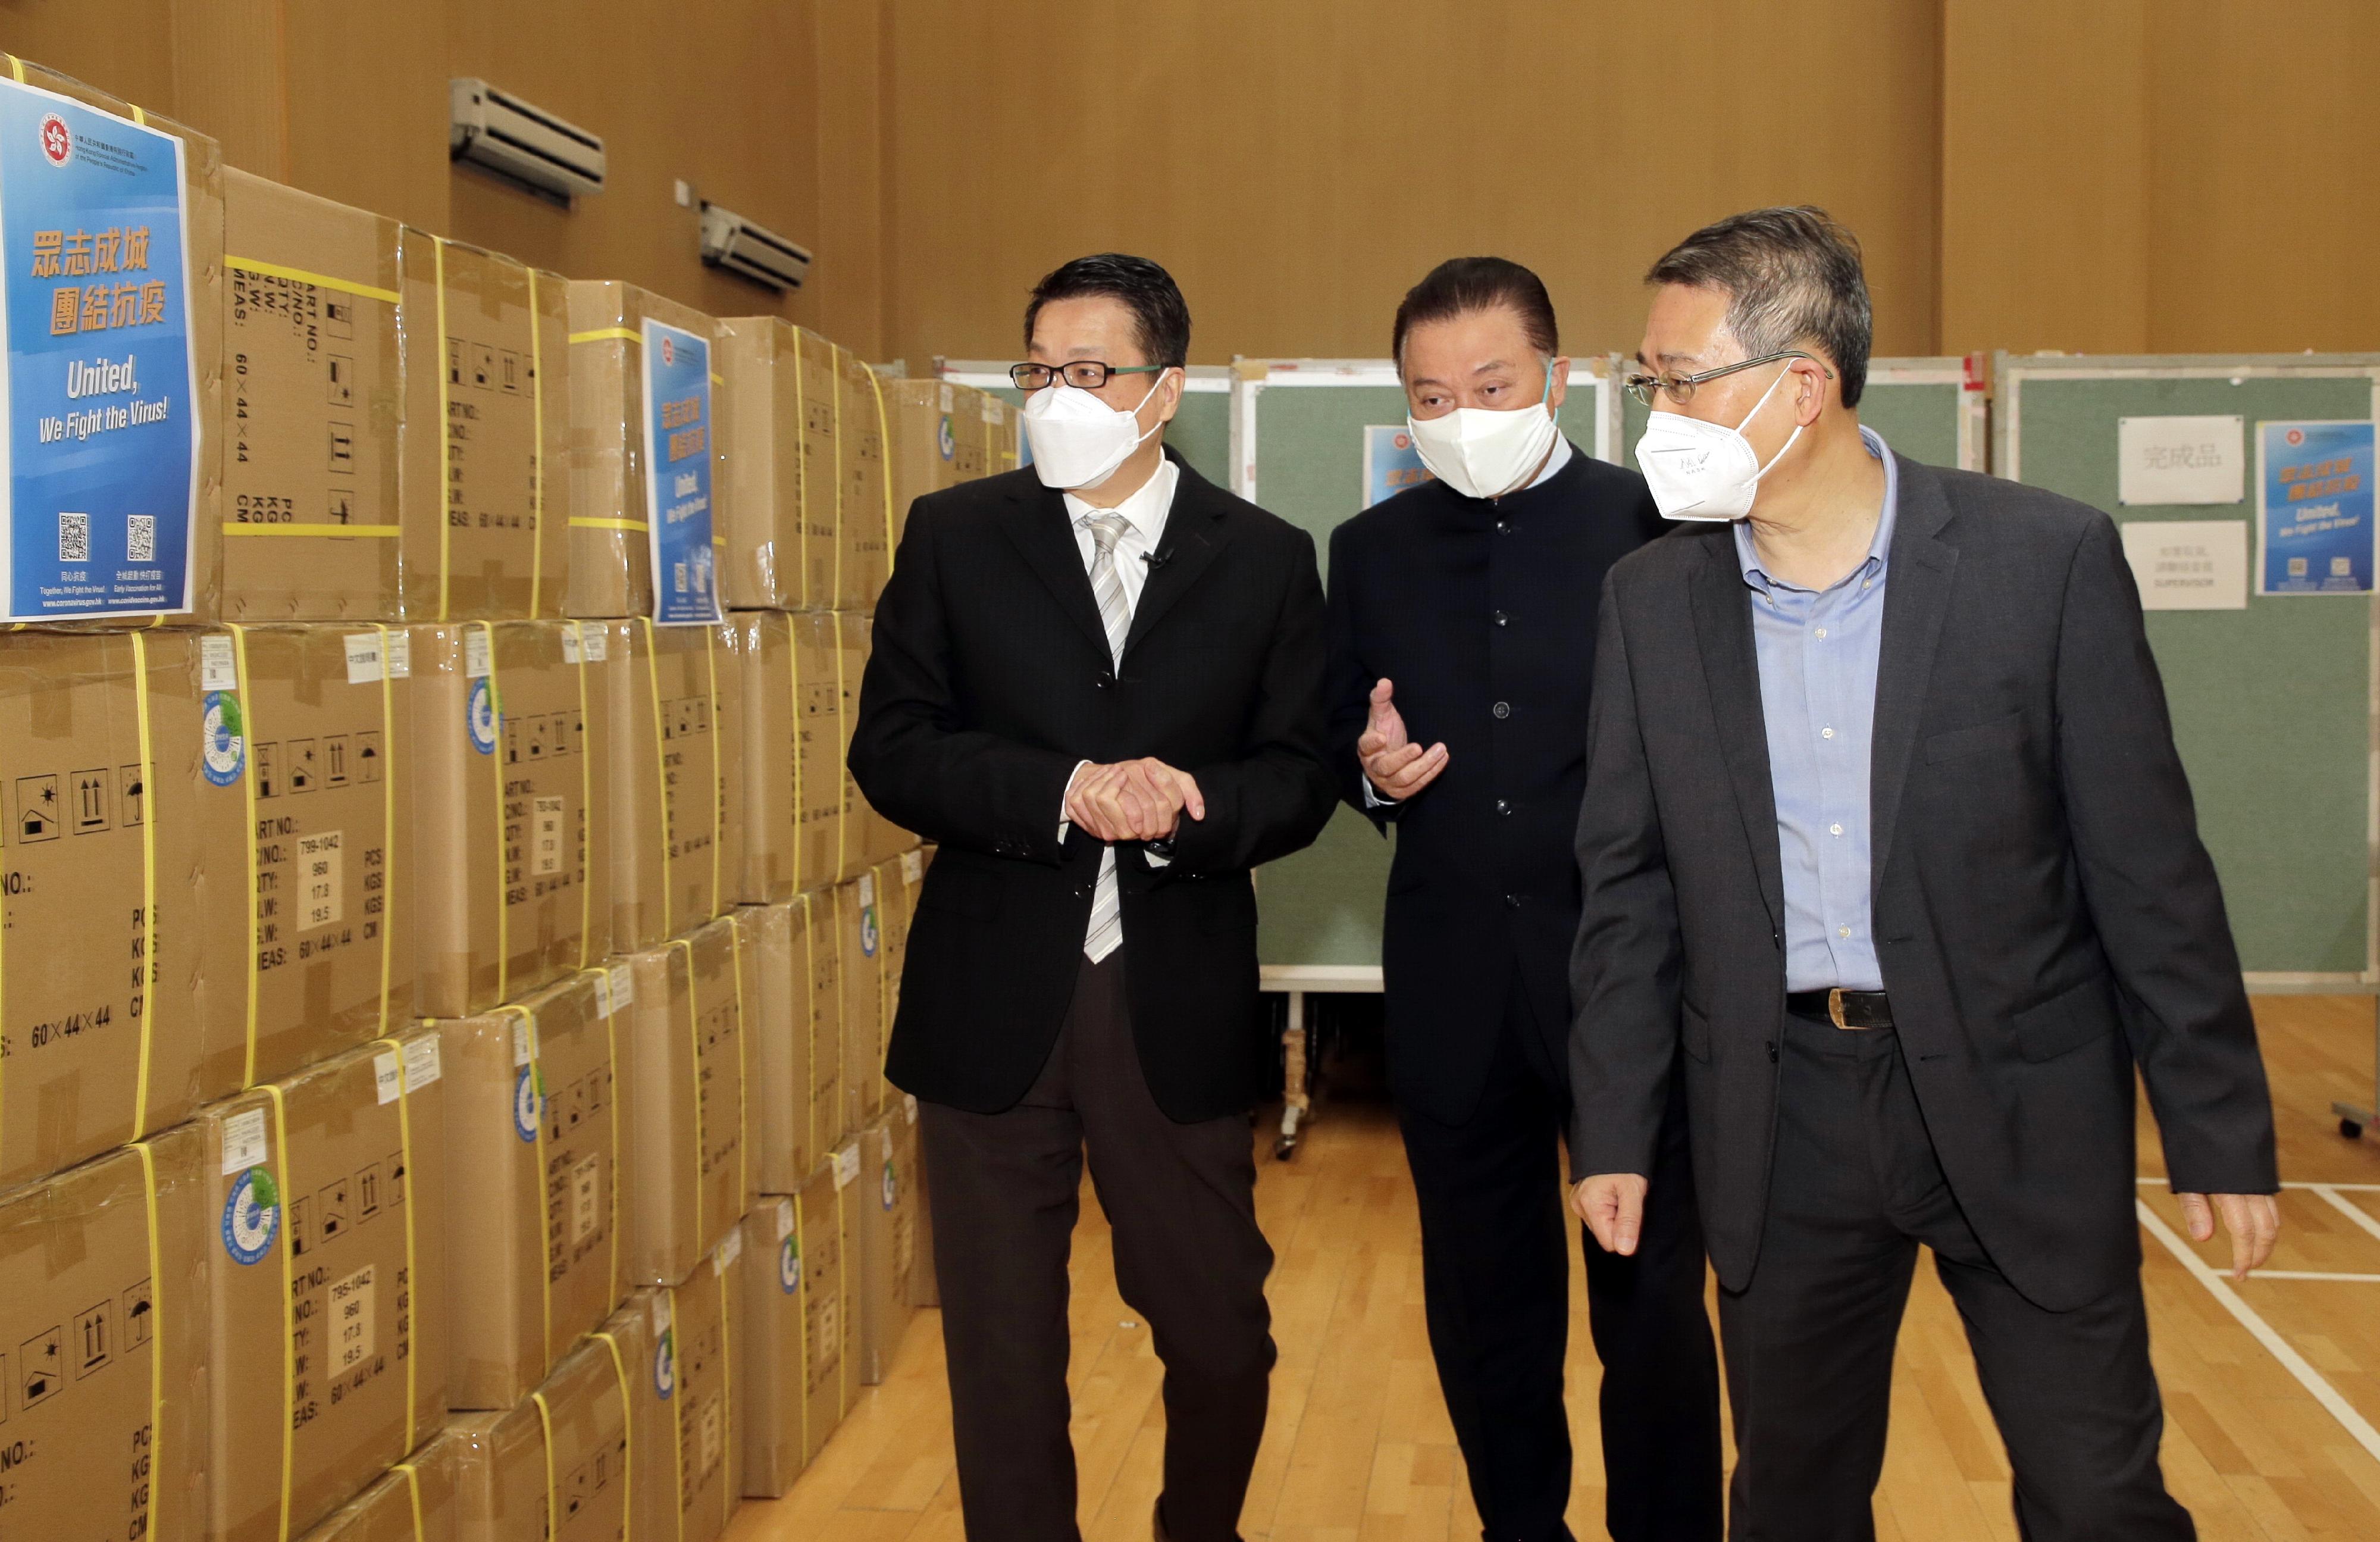 The Special Administrative Region Government is working at full steam on the preparation of packaging and distribution of anti-epidemic service bags. Photo shows the Acting Secretary for Home Affairs, Mr Jack Chan (left), accompanied by the District Officer (Eastern), Mr Simon Chan (right), and the Chief Convener of the Hong Kong Community Anti-Coronavirus Link, Dr Bunny Chan (centre), visiting a distribution centre of anti-epidemic service bags in Causeway Bay Community Centre today (March 29).